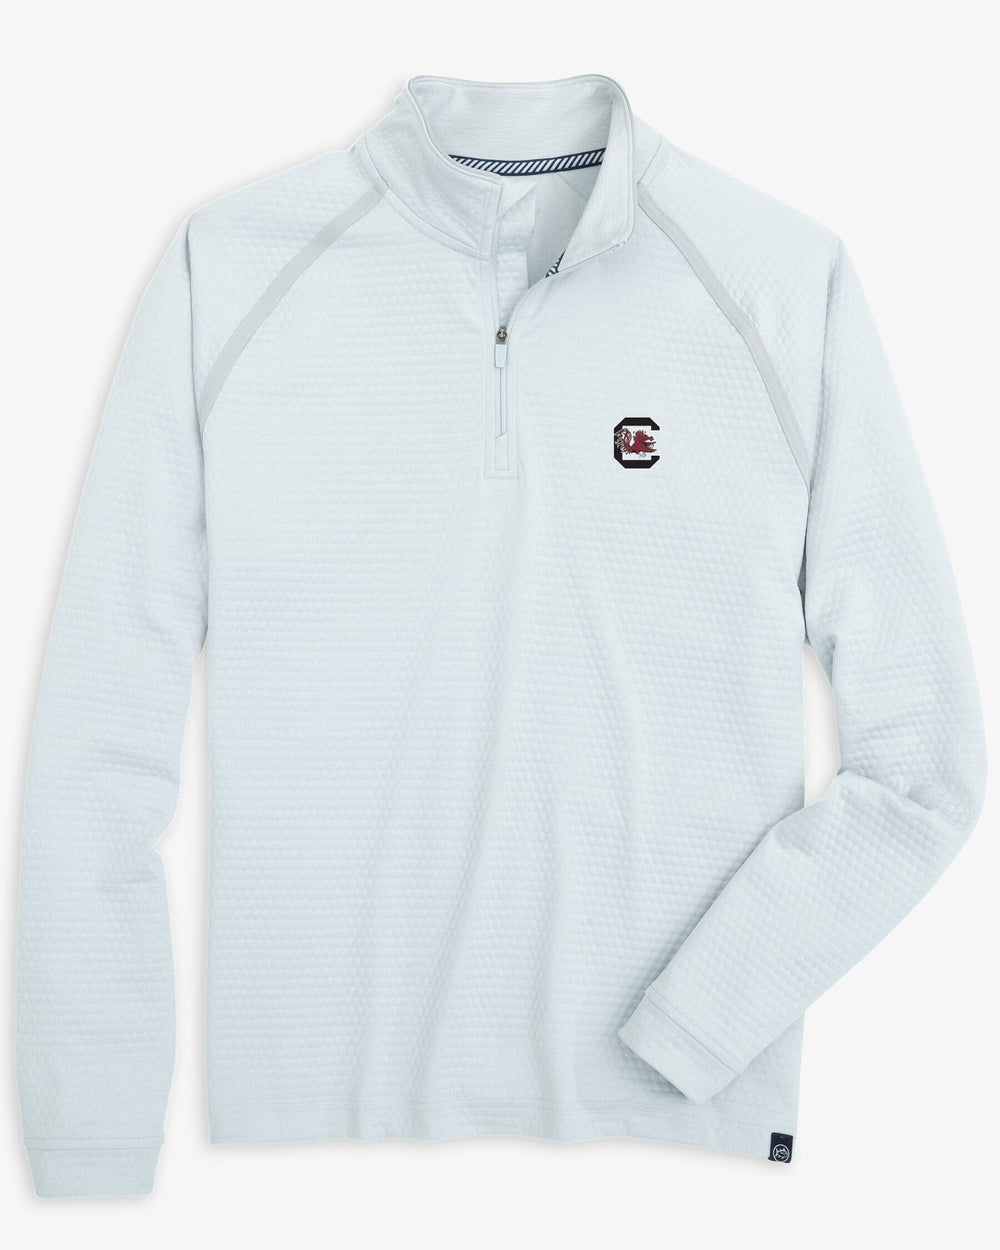 The front view of the USC Gamecocks Scuttle Heather Quarter Zip by Southern Tide - Heather Slate Grey